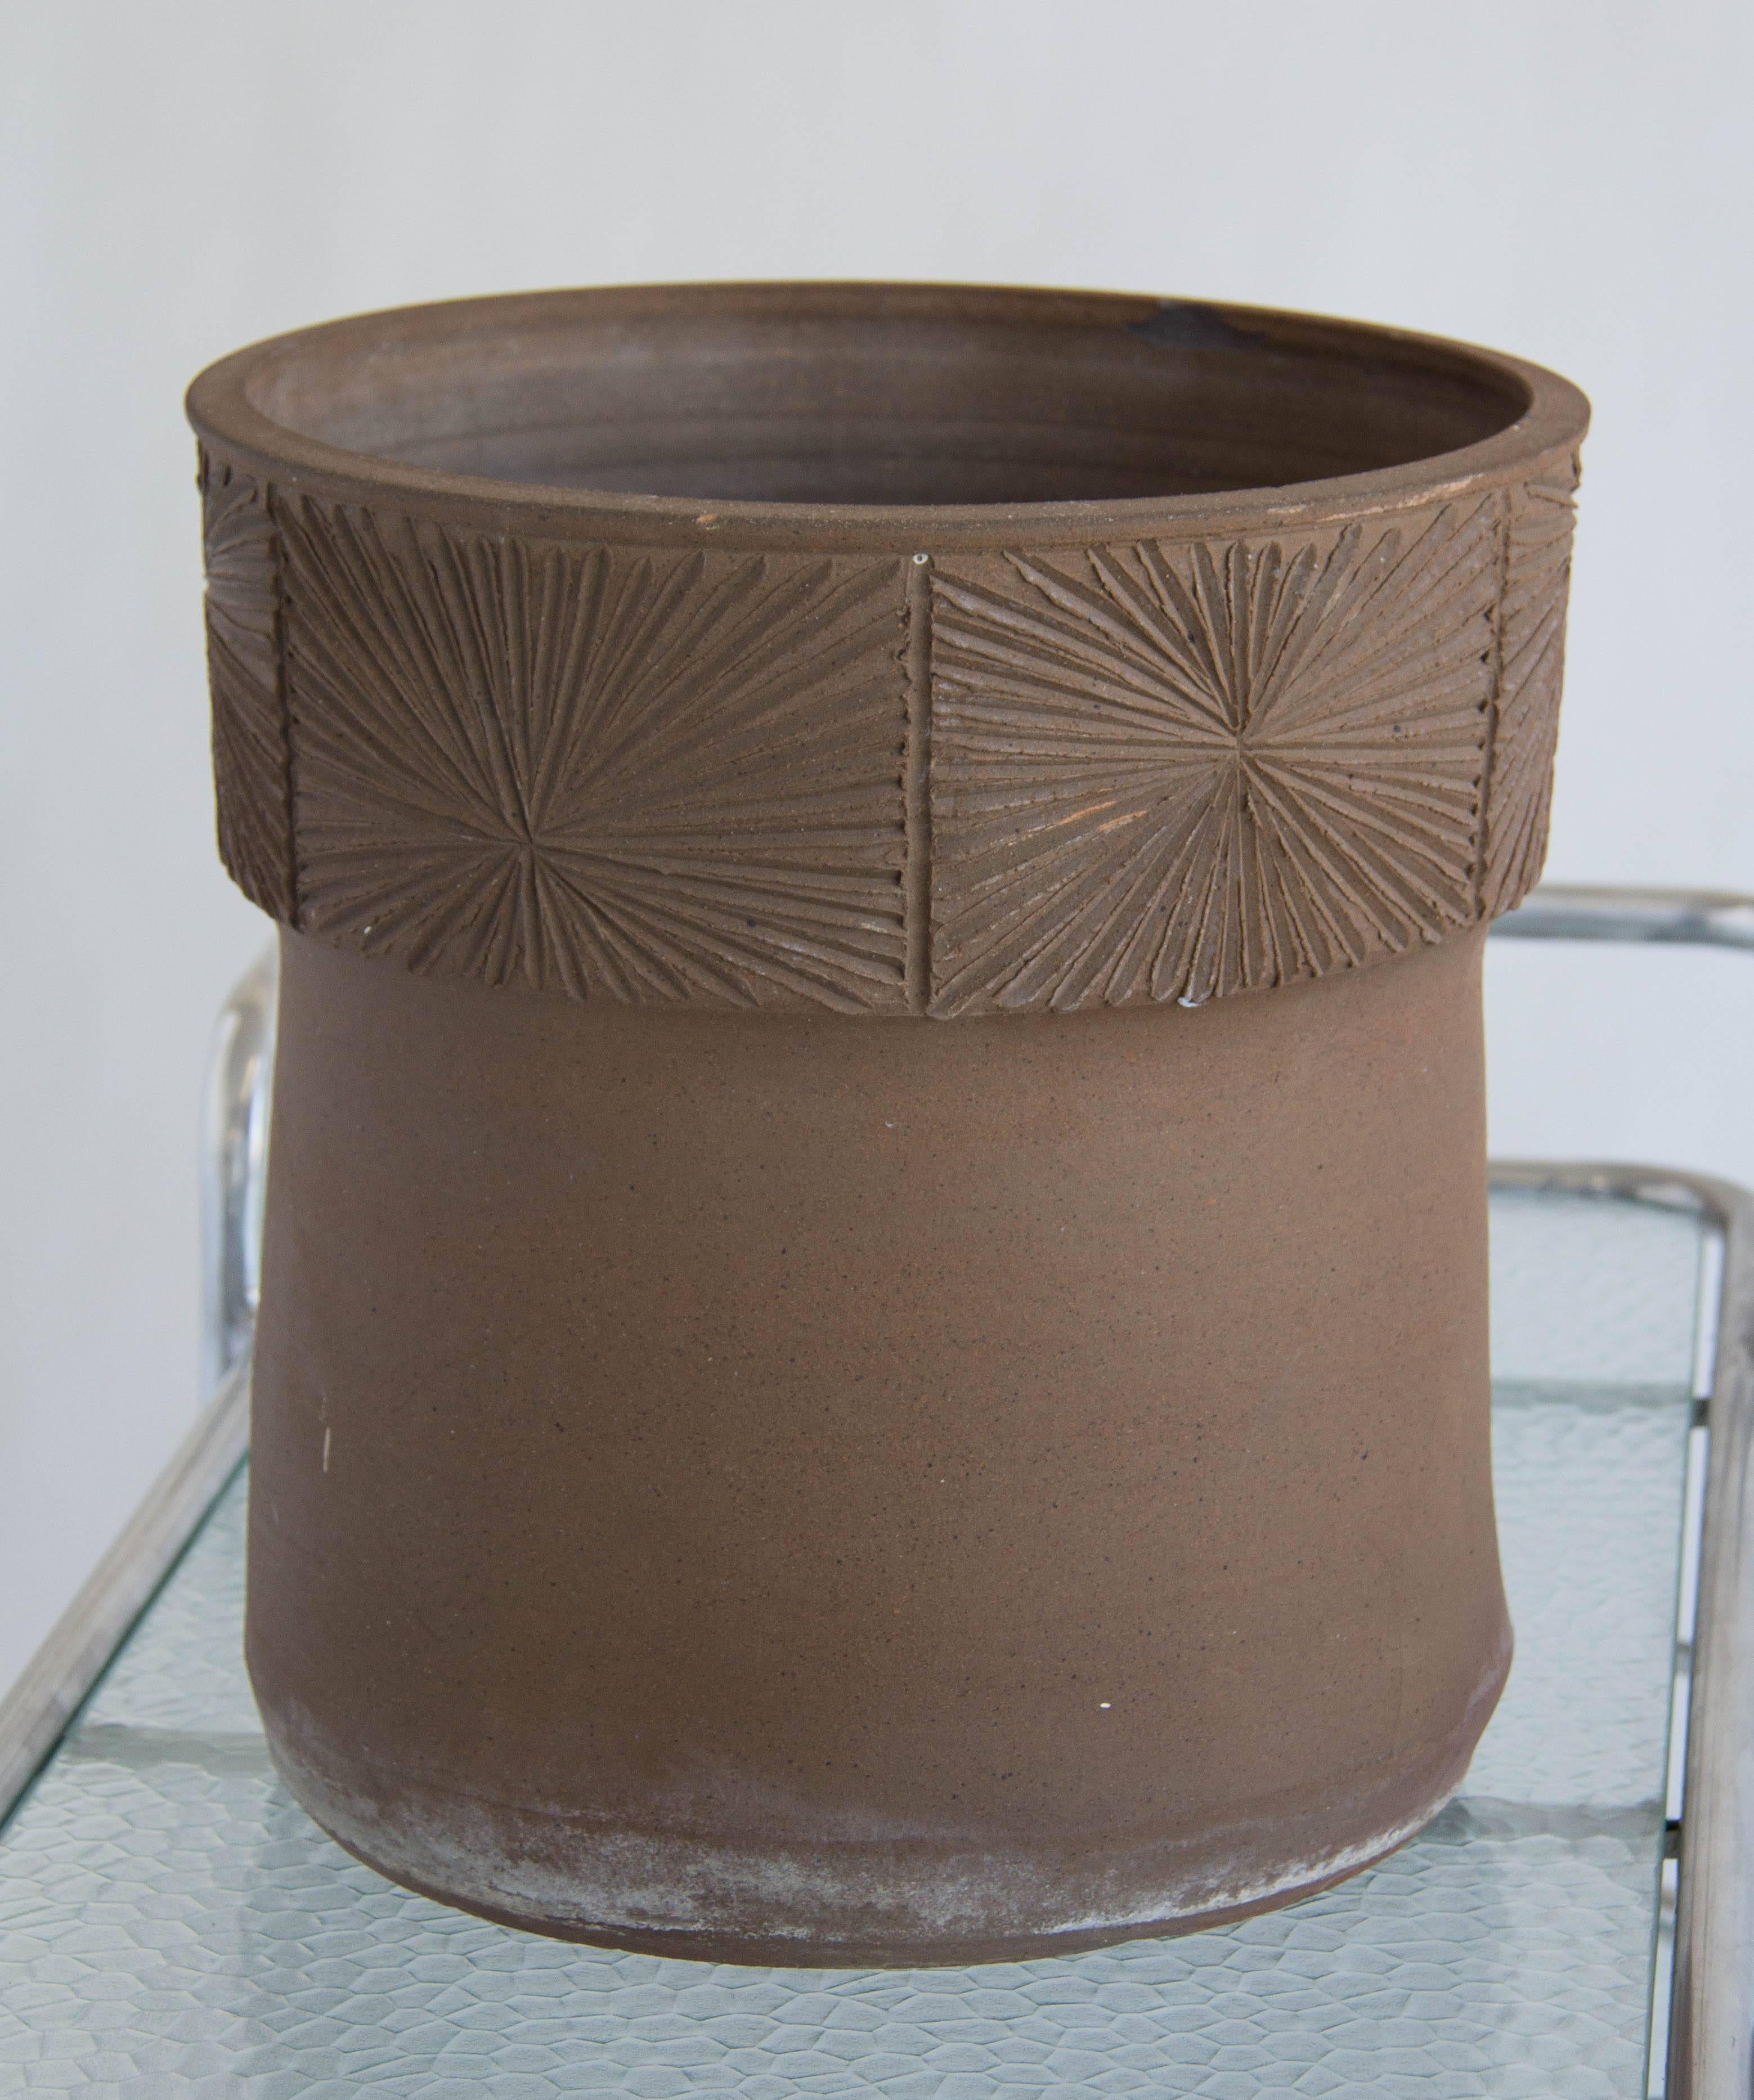 Large stoneware planter by iconic artist and potter David Cressey. Features his signature beautifully carved and incised sunburst style decoration as a lip around the planter.